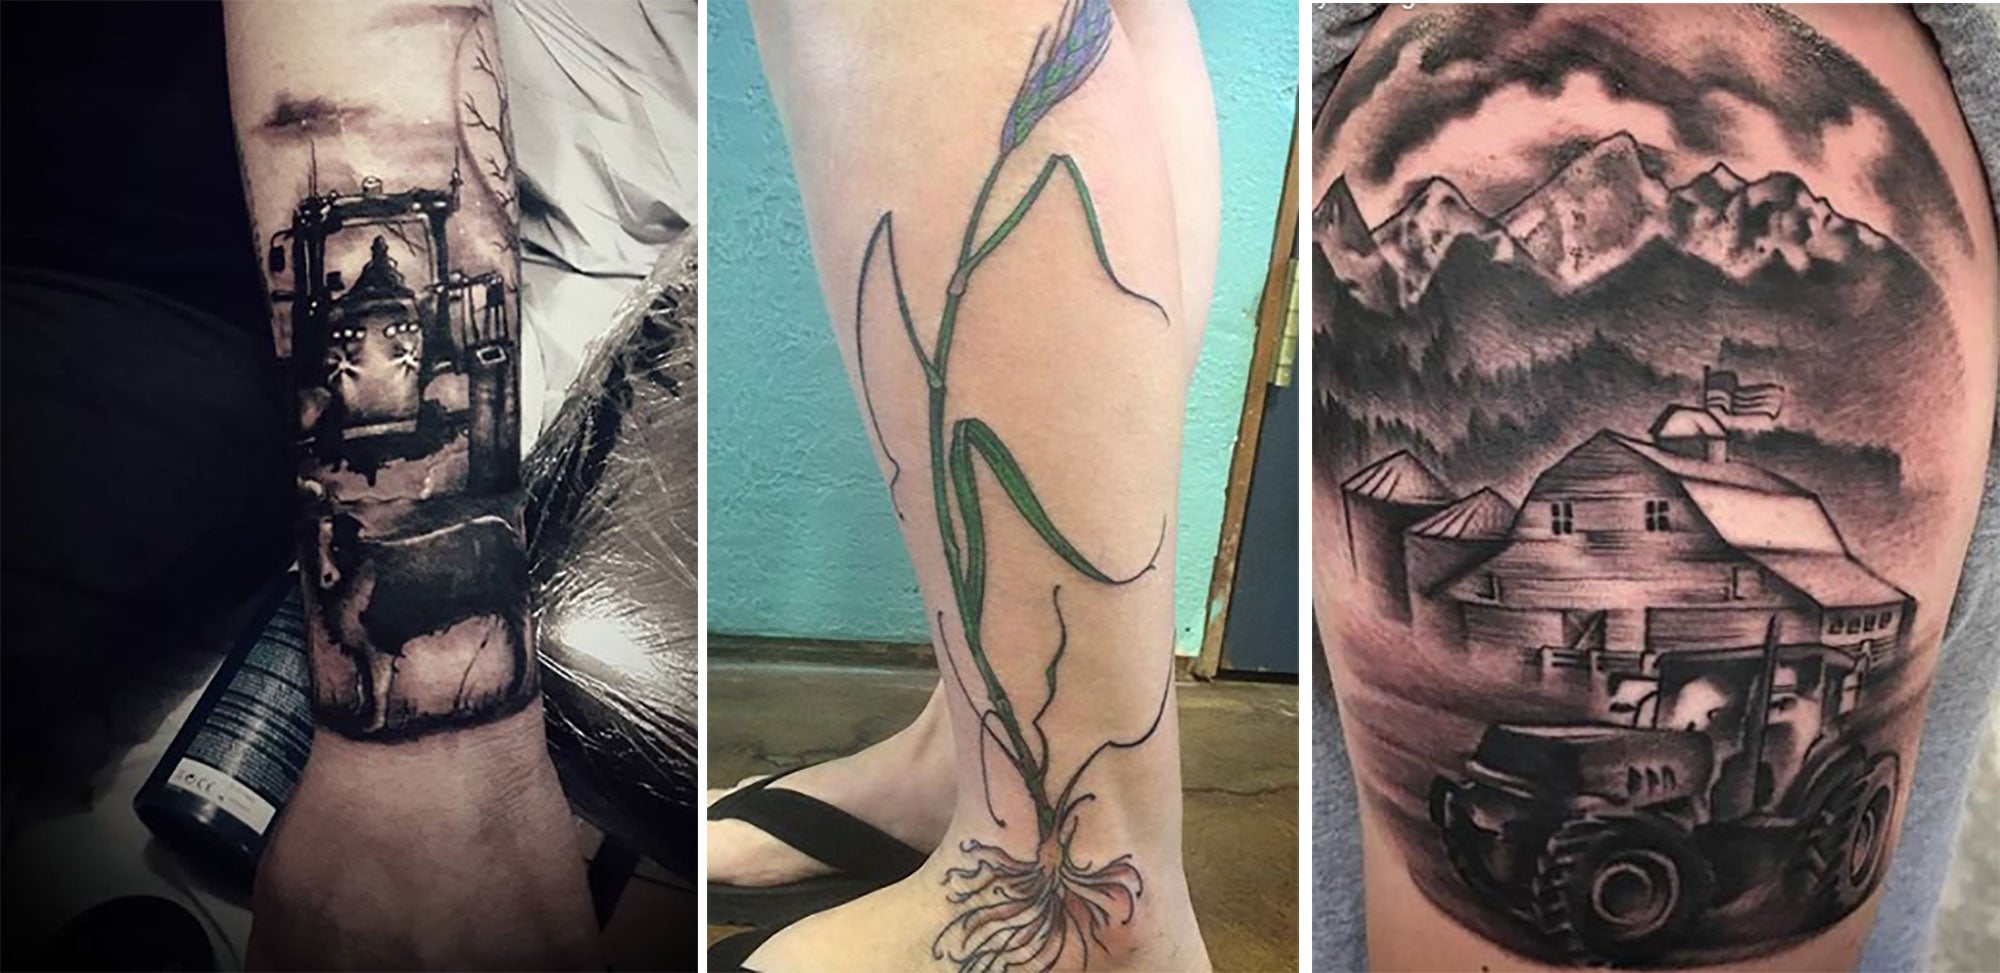 18 awesome farm tattoos that help make you proud to be rural